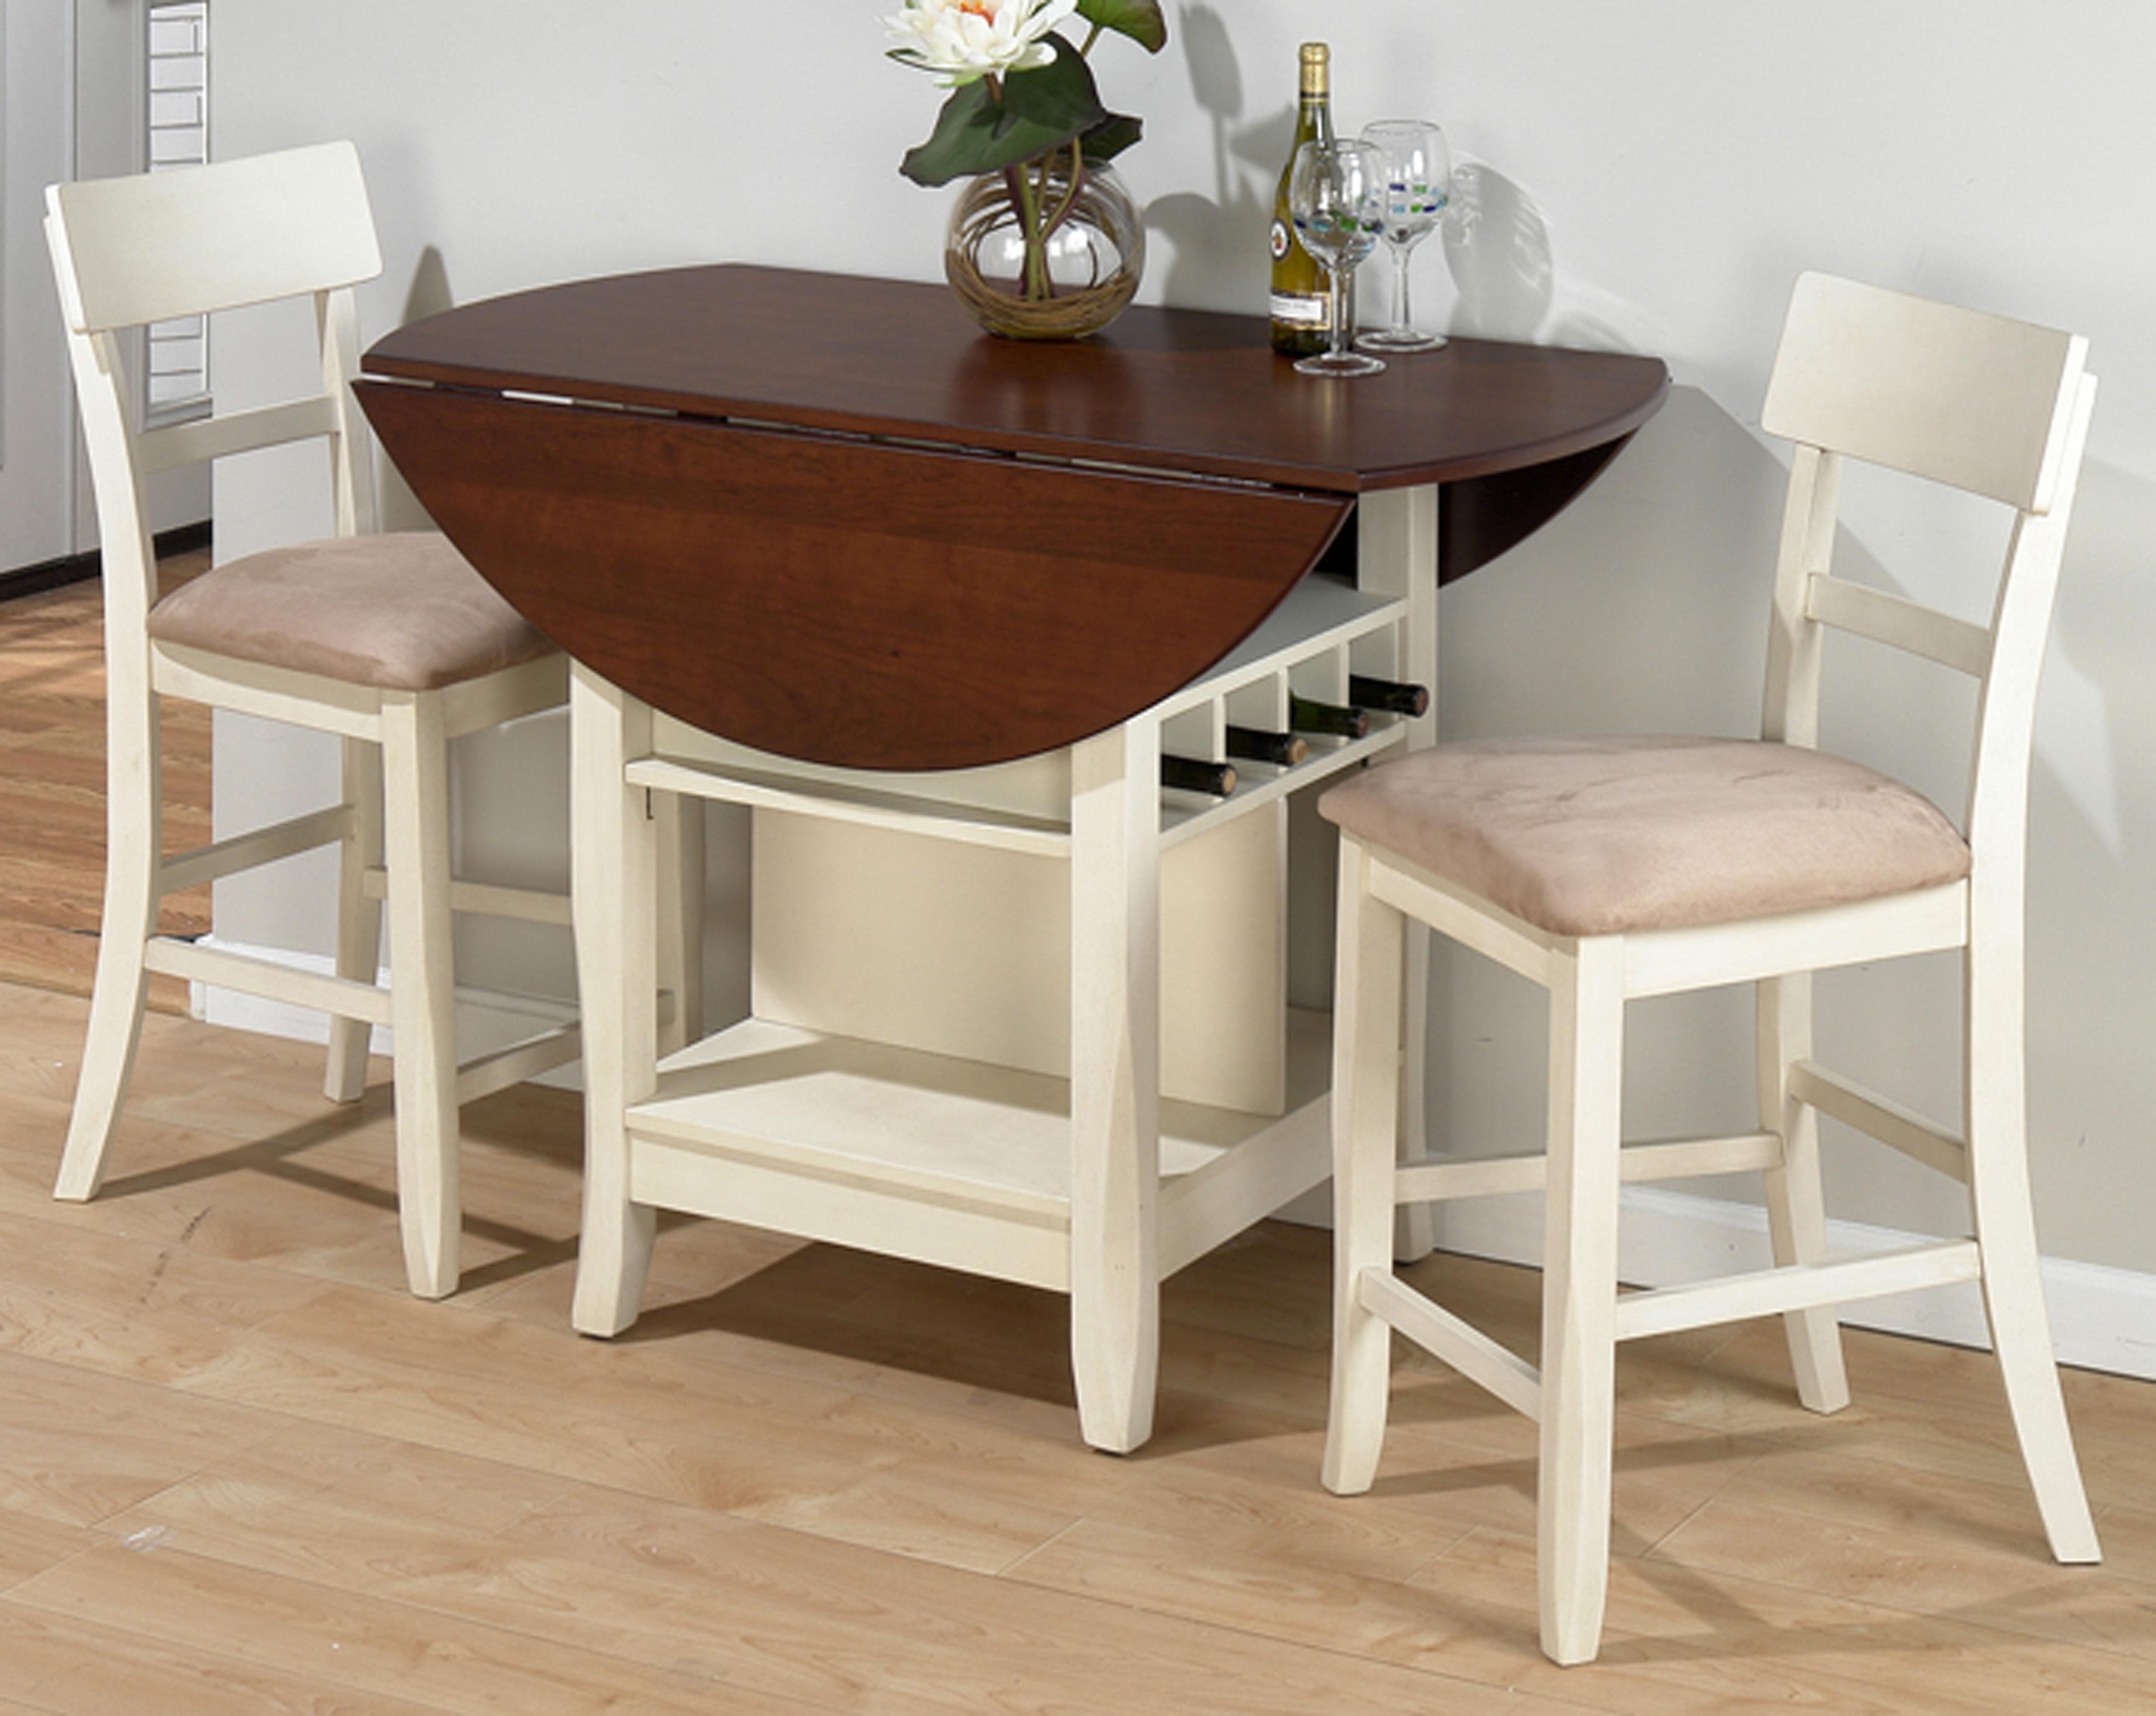 Small Dining Room Tables That Expand